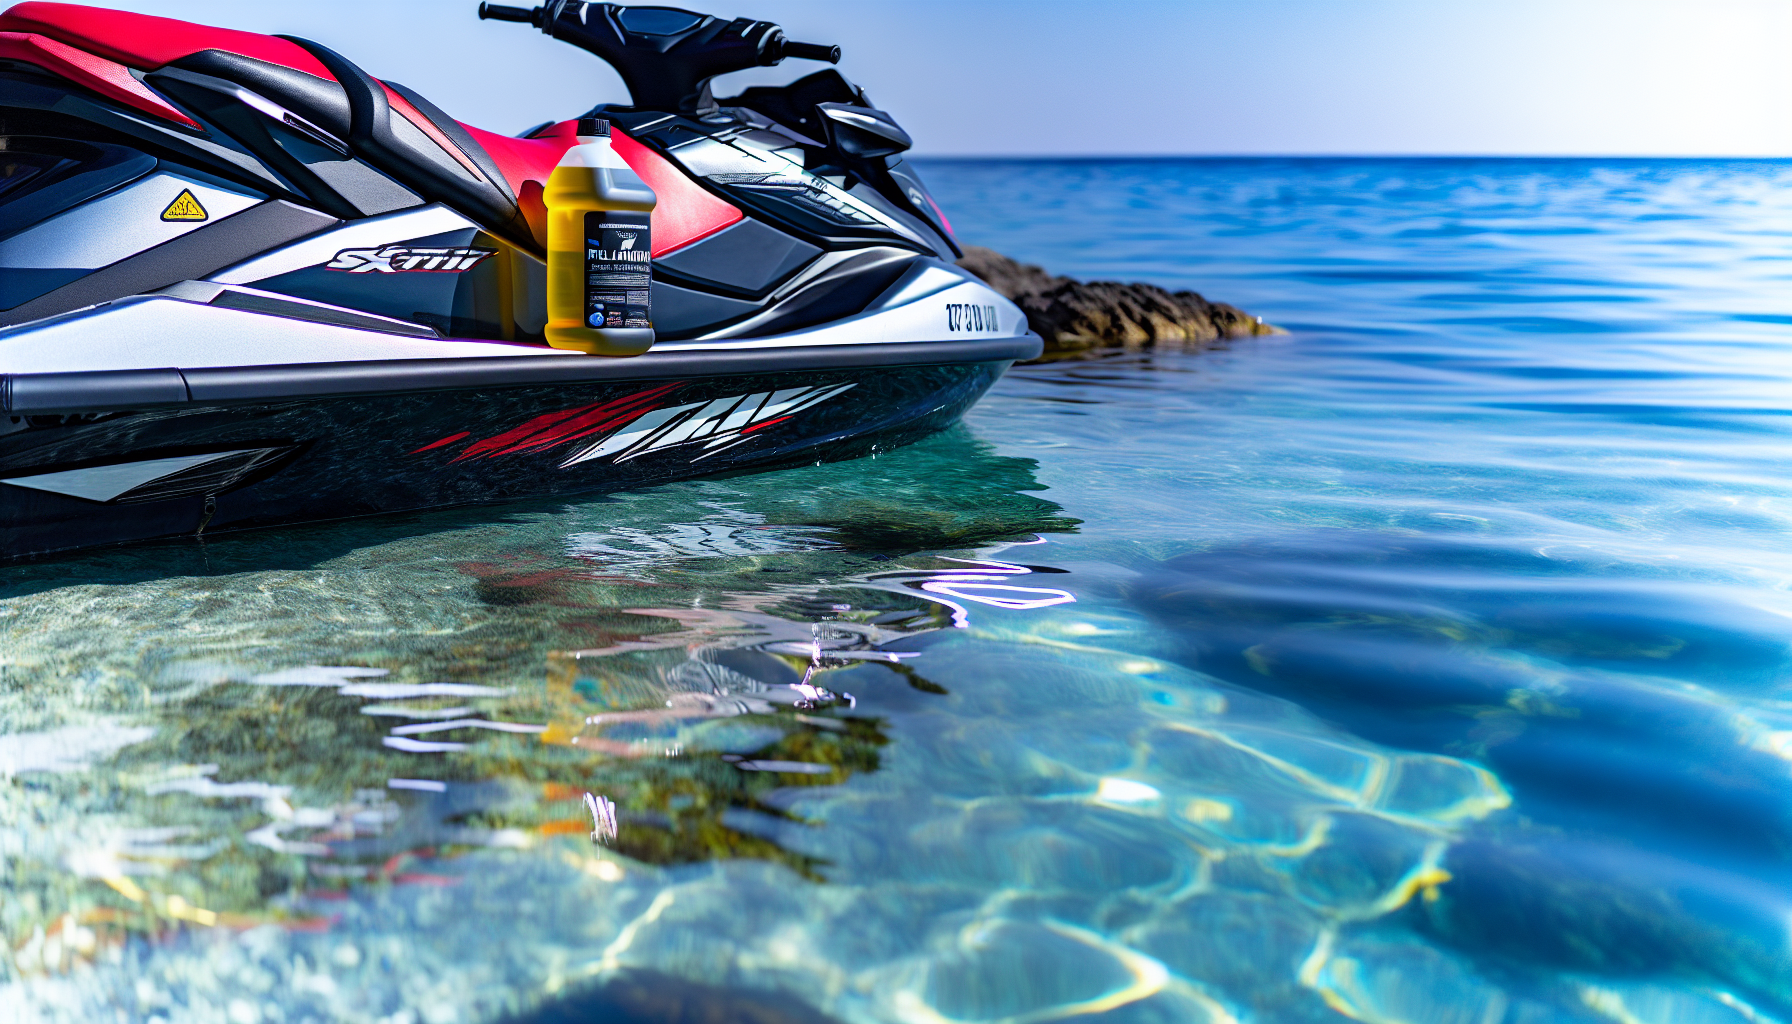 A jet ski on the water with a fuel stabiliser bottle nearby